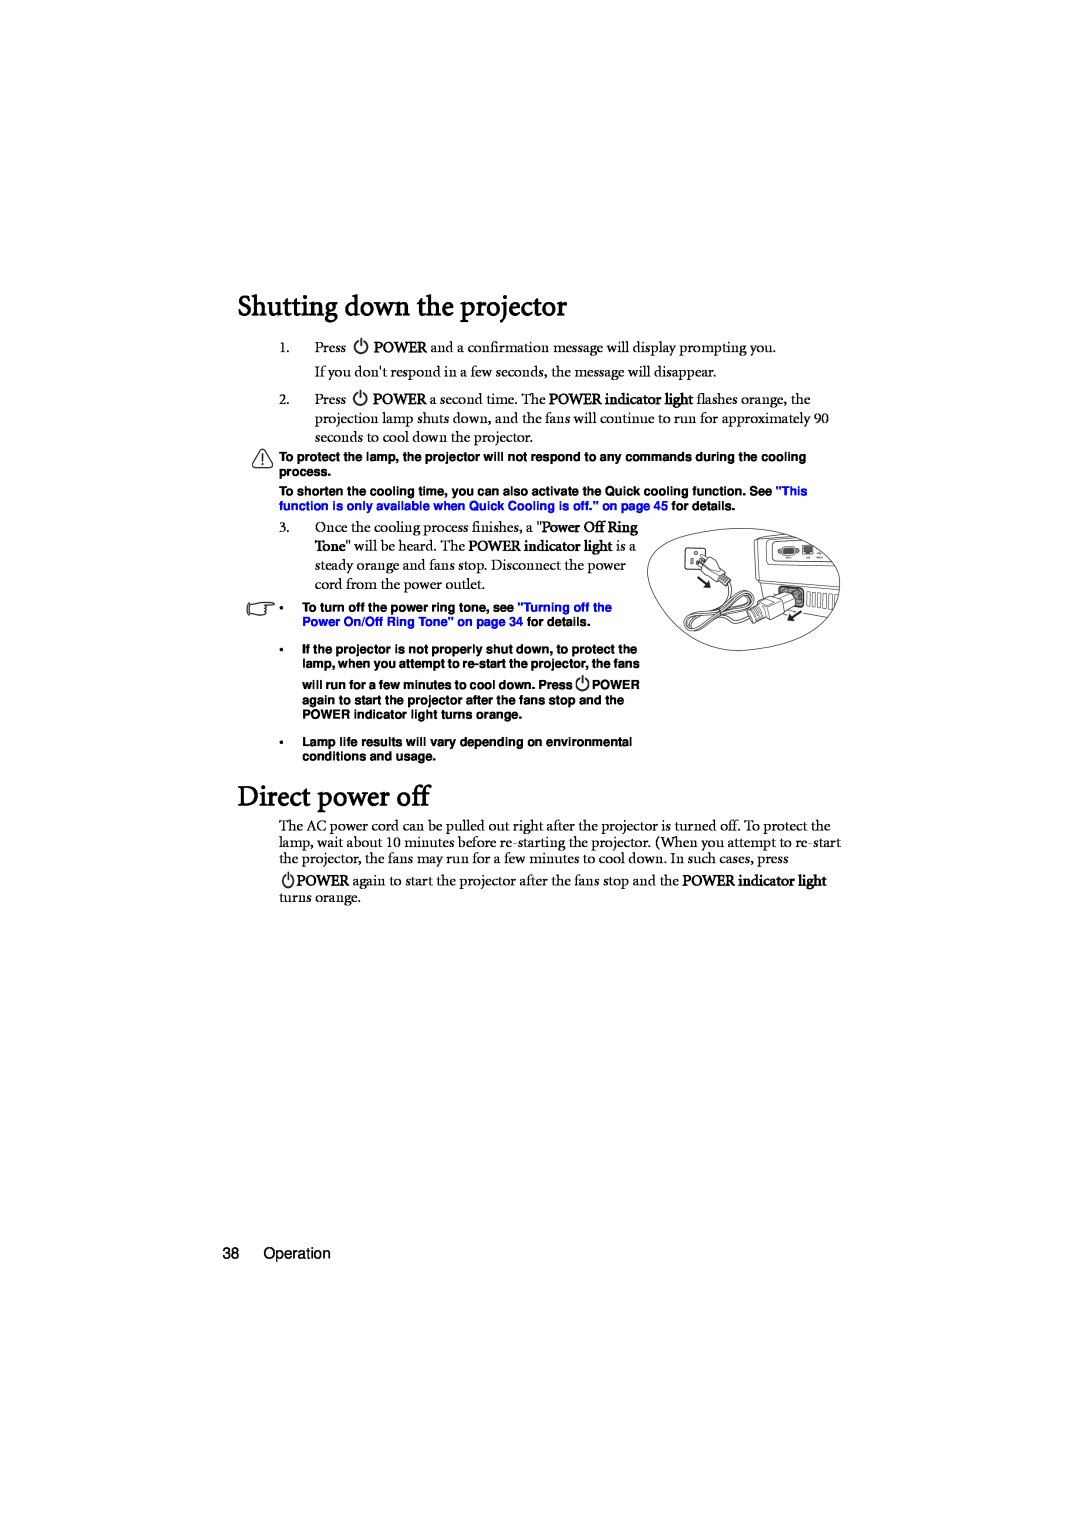 BenQ MX701 user manual Shutting down the projector, Direct power off 